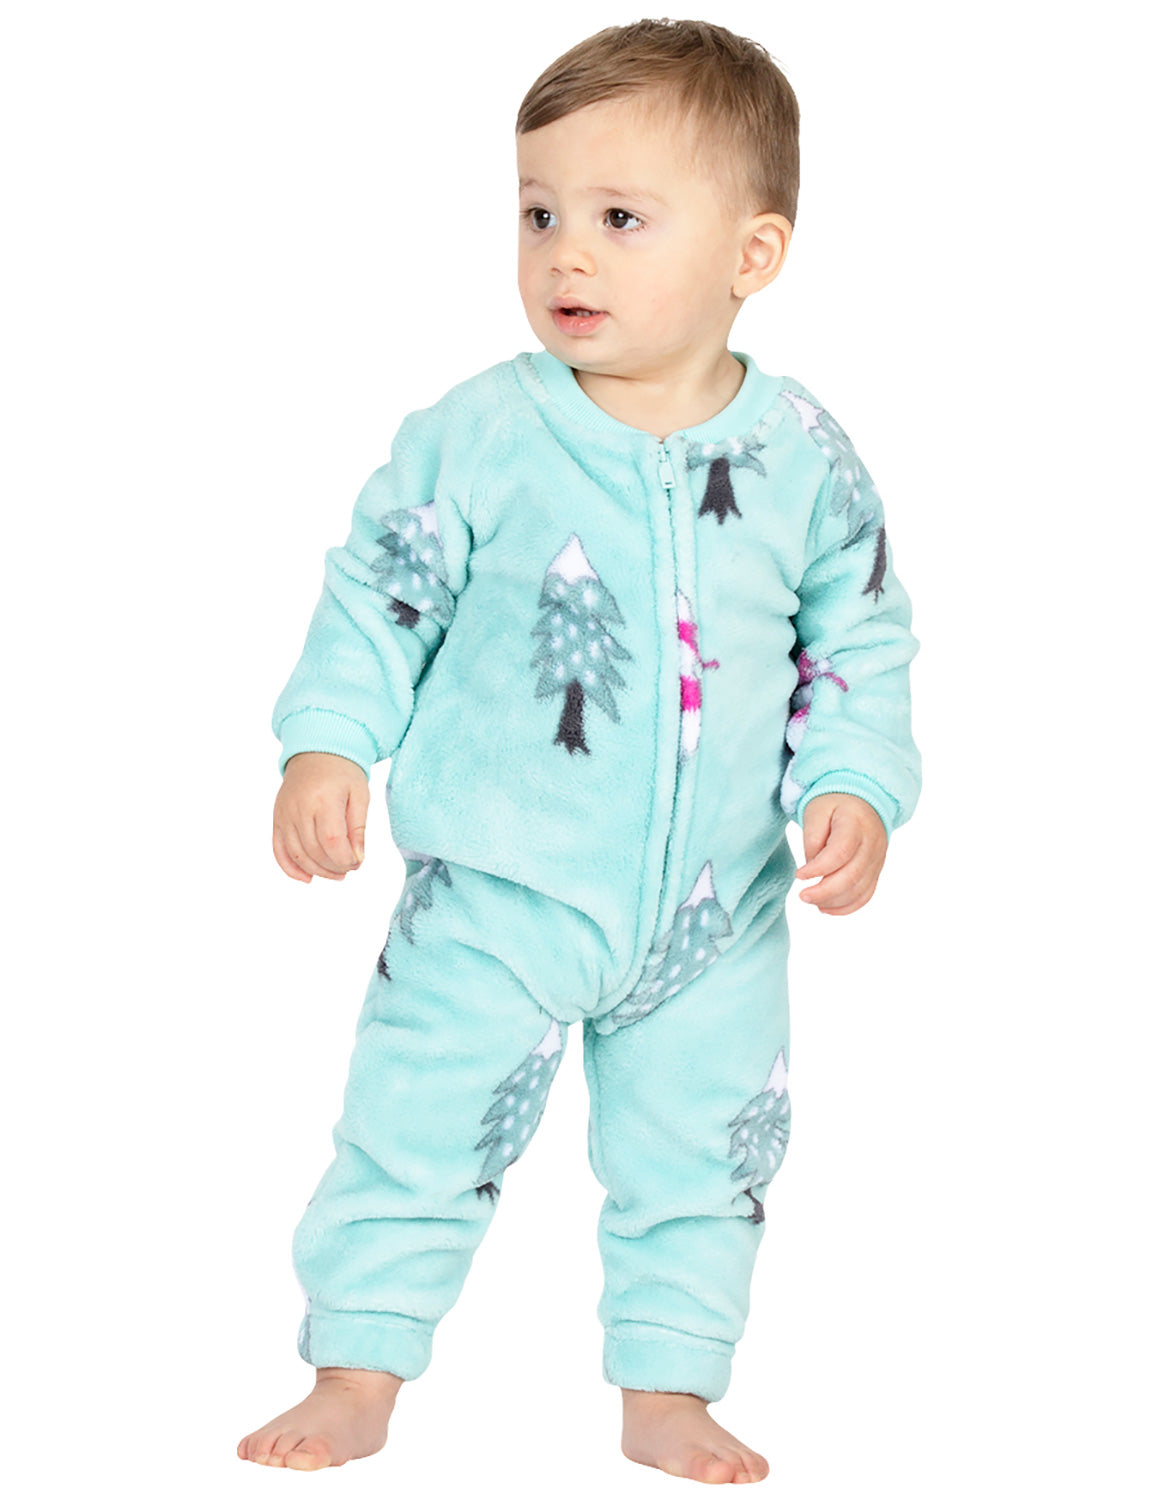 Infant Footless Onesies - Footed Pajamas Co.